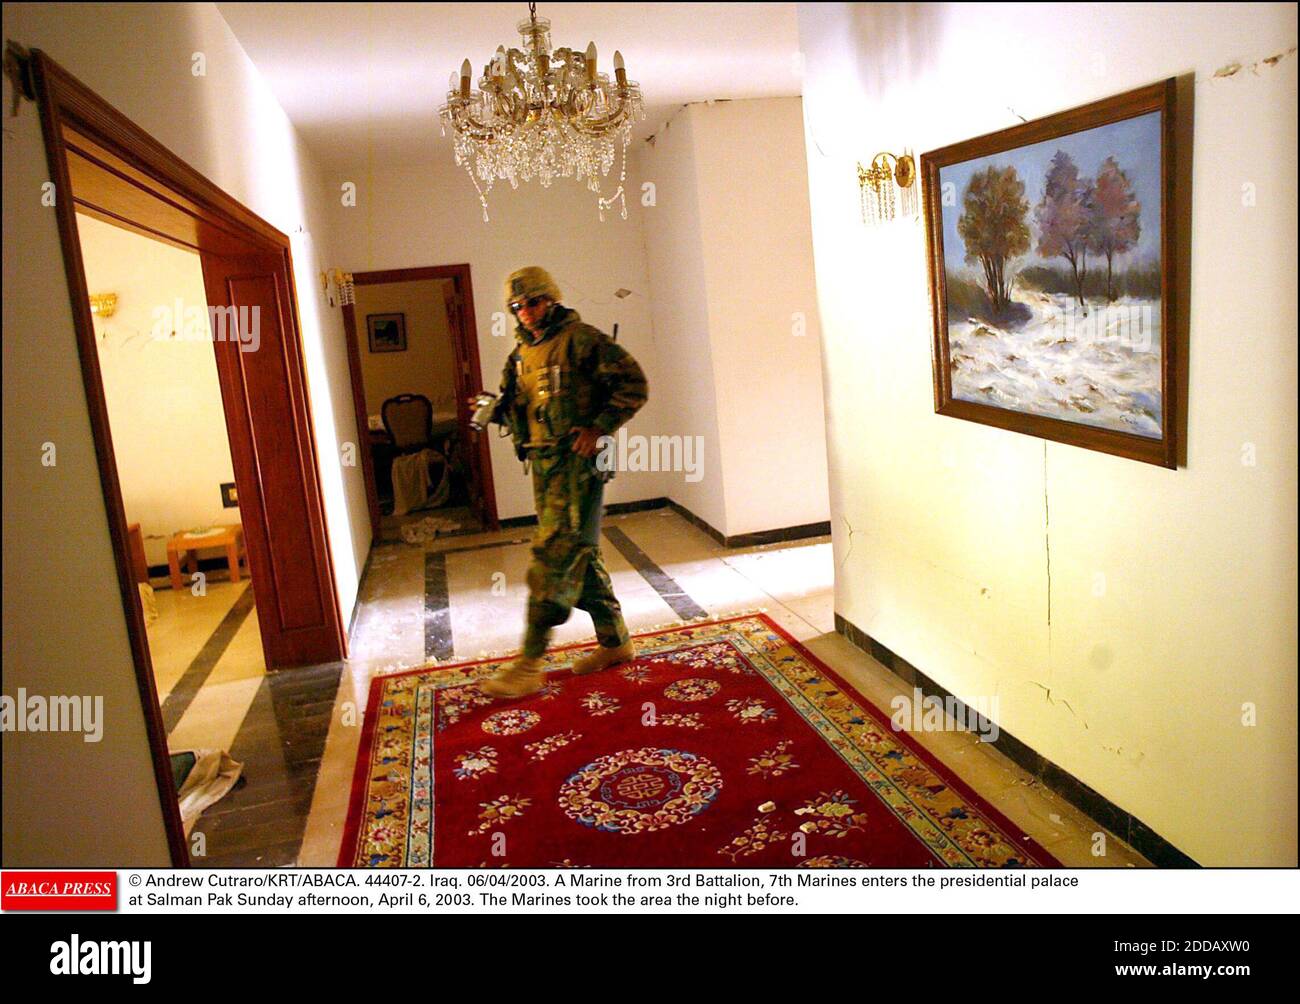 NO FILM, NO VIDEO, NO TV, NO DOCUMENTARY - © Andrew Cutraro/KRT/ABACA. 44407-2. Iraq. 06/04/2003. A Marine from 3rd Battalion, 7th Marines enters the presidential palace at Salman Pak Sunday afternoon, April 6, 2003. The Marines took the area the night before. Stock Photo